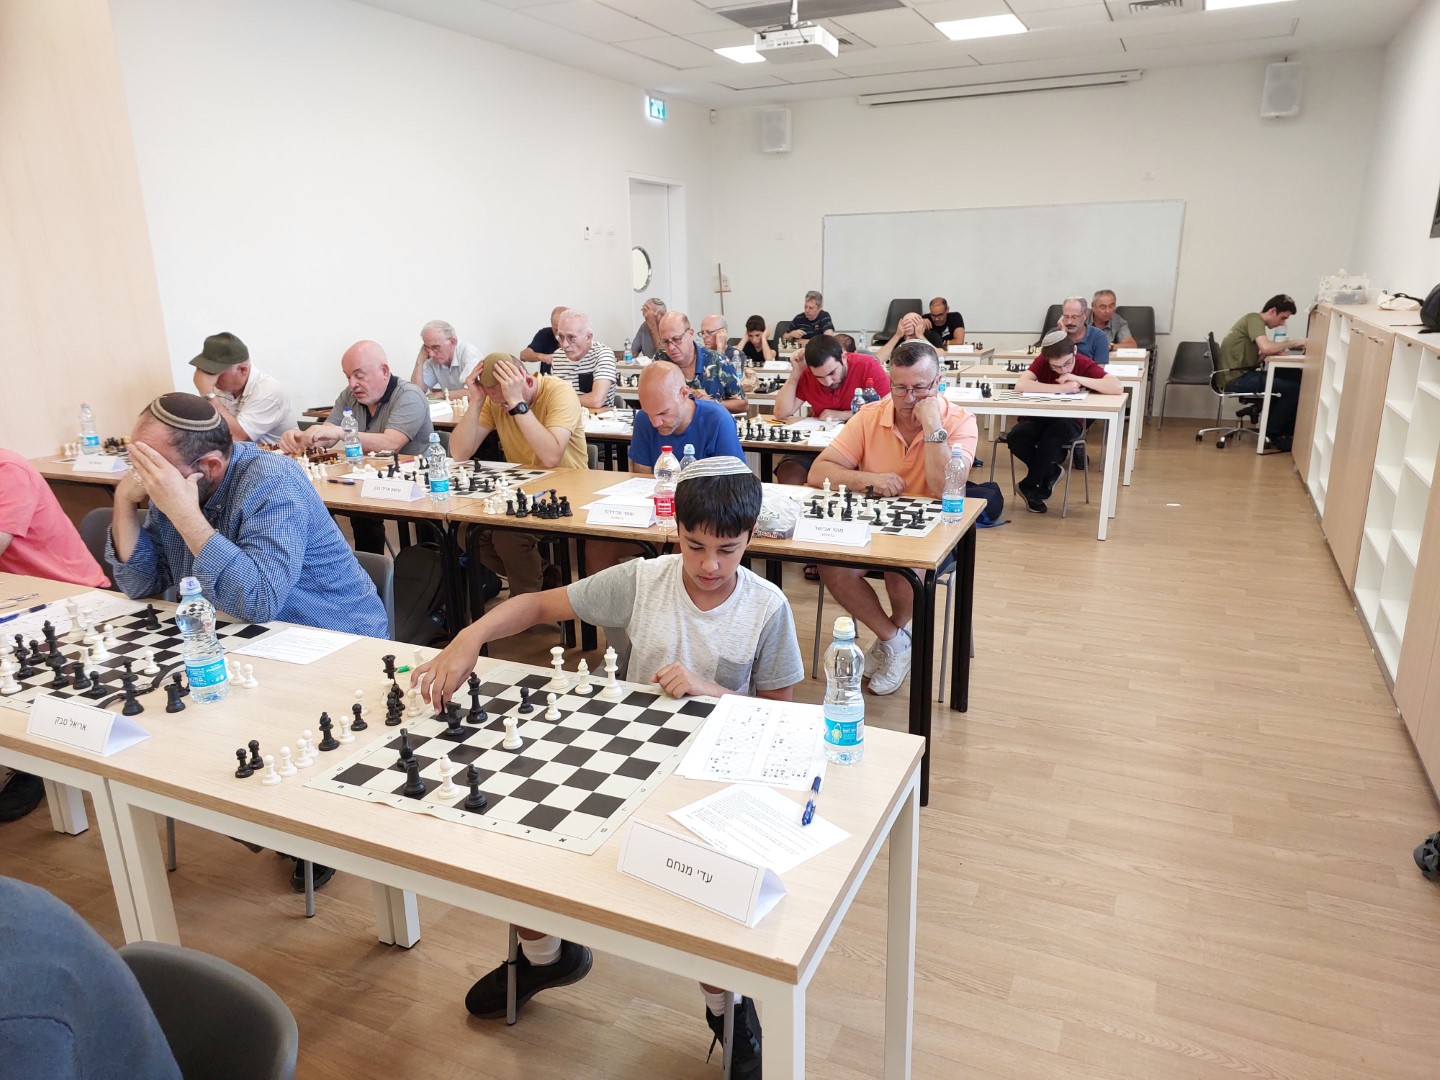 January 2023 Chess Solvers rating list published